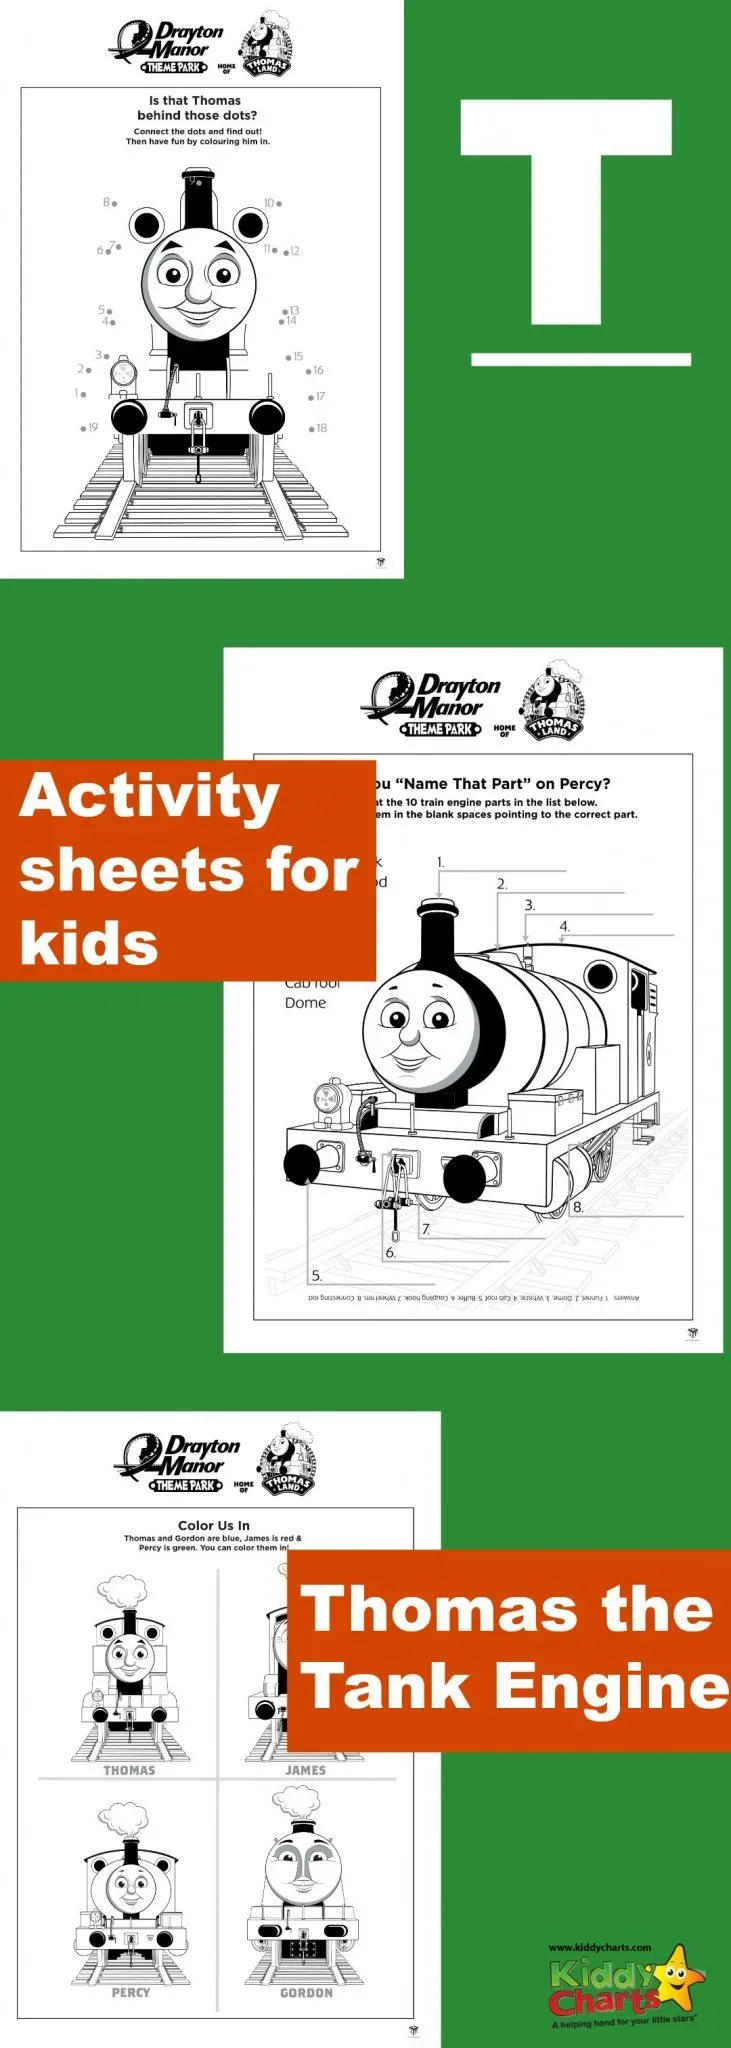 Thomas the tank engine activity sheets for all those train fans out there! #trains #kidscolouring #thomas